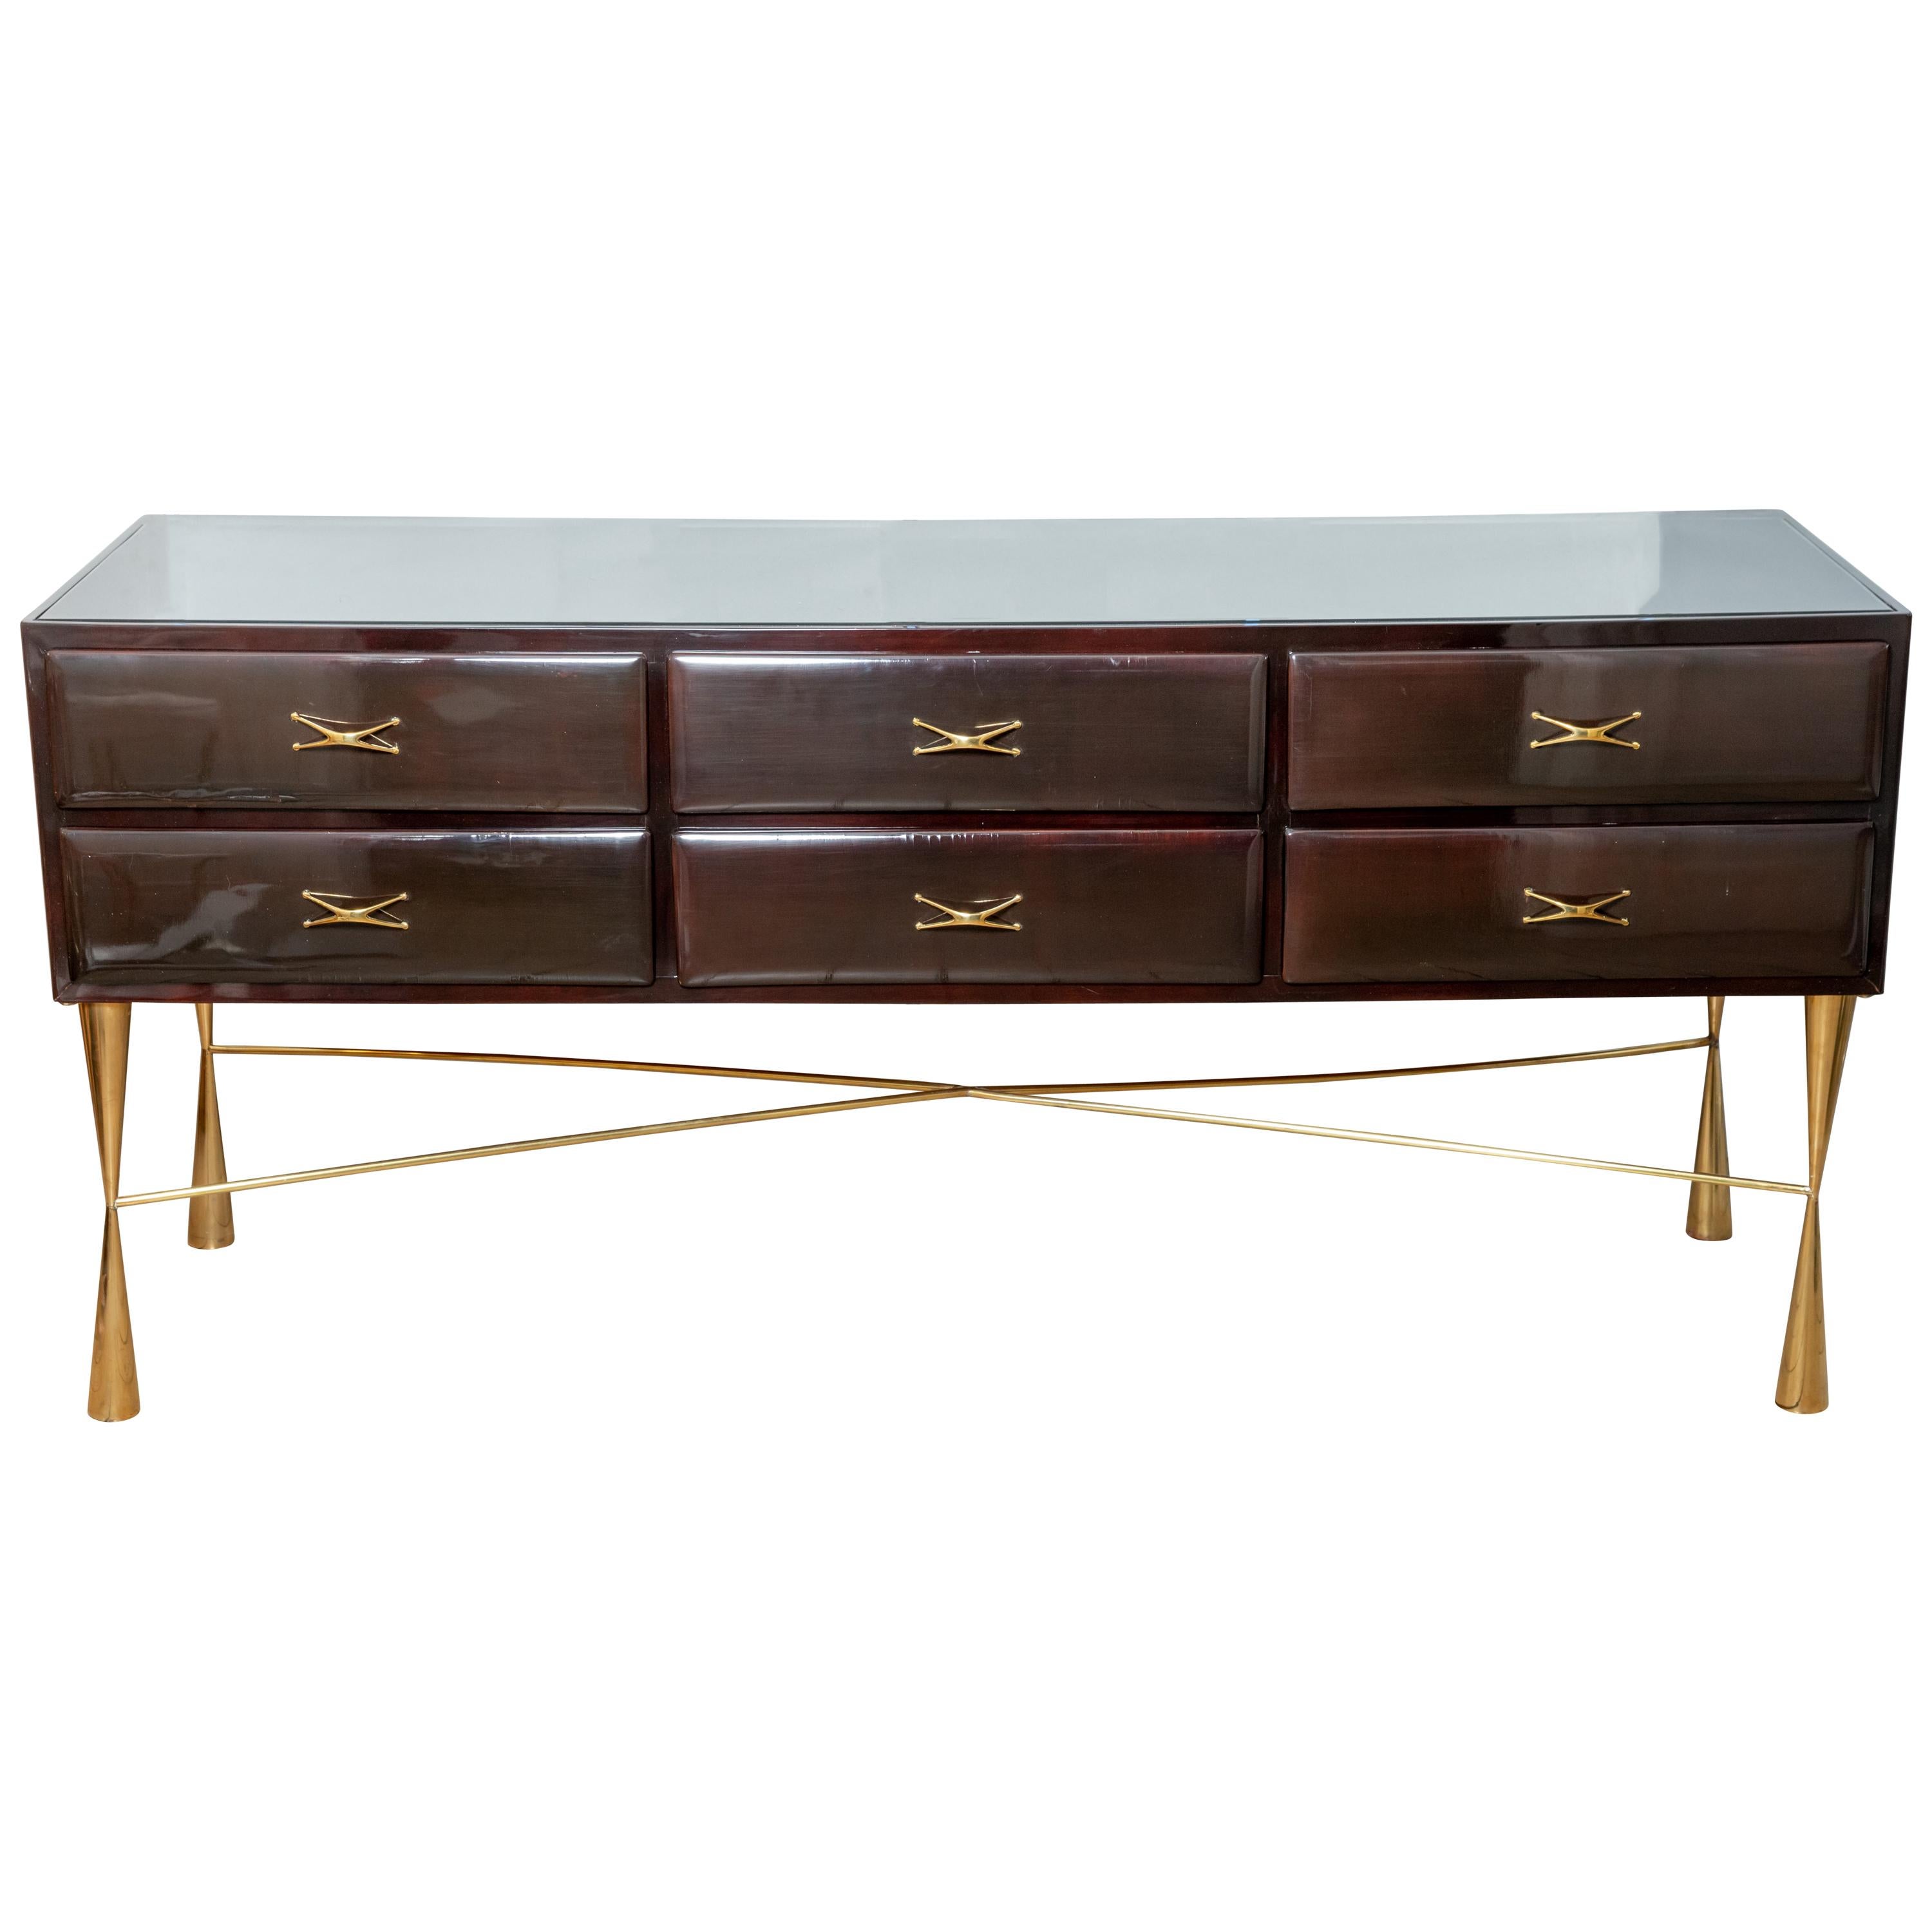 Rectangular Lacquered Wood and Brass Six-Drawer Console with Glass Top